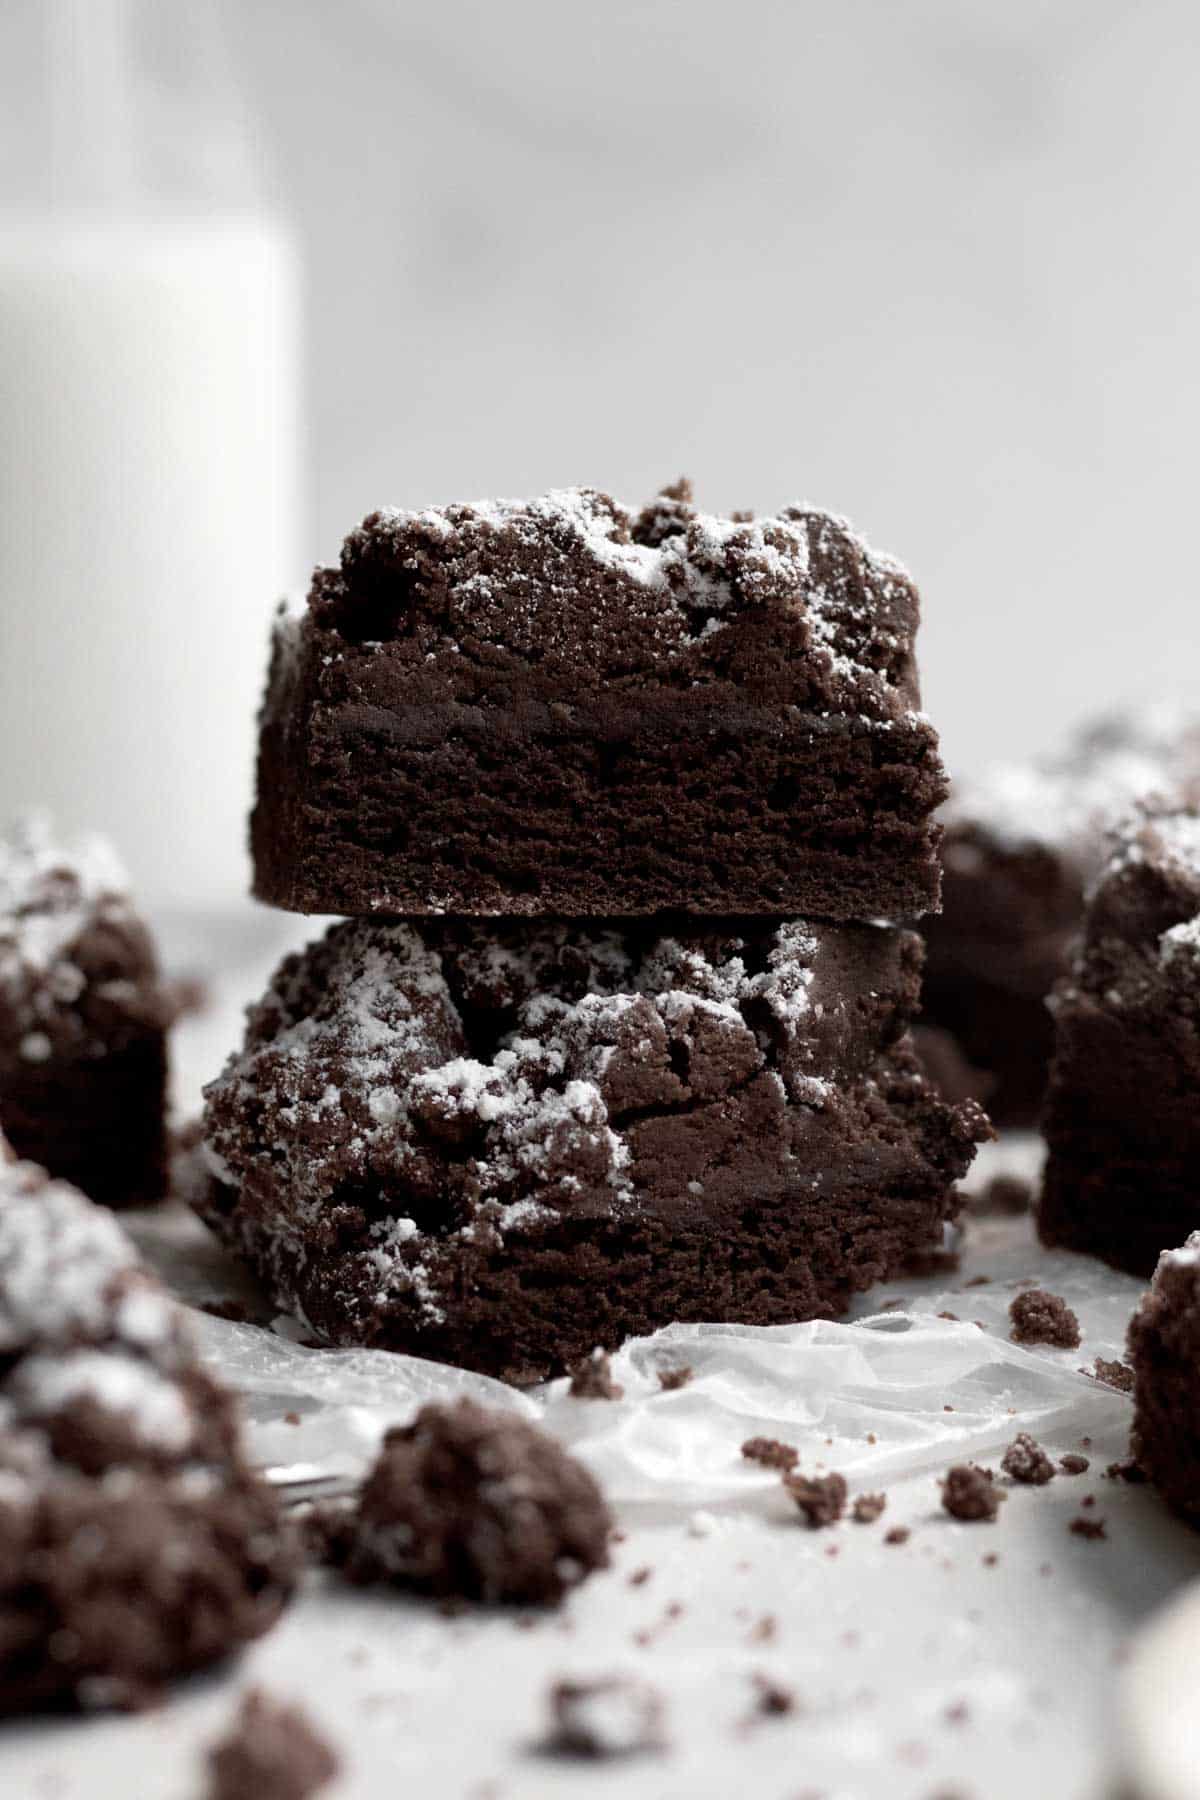 Two buttery, dark and delicious Chocolate Crumb Cakes stacked on top of each other.